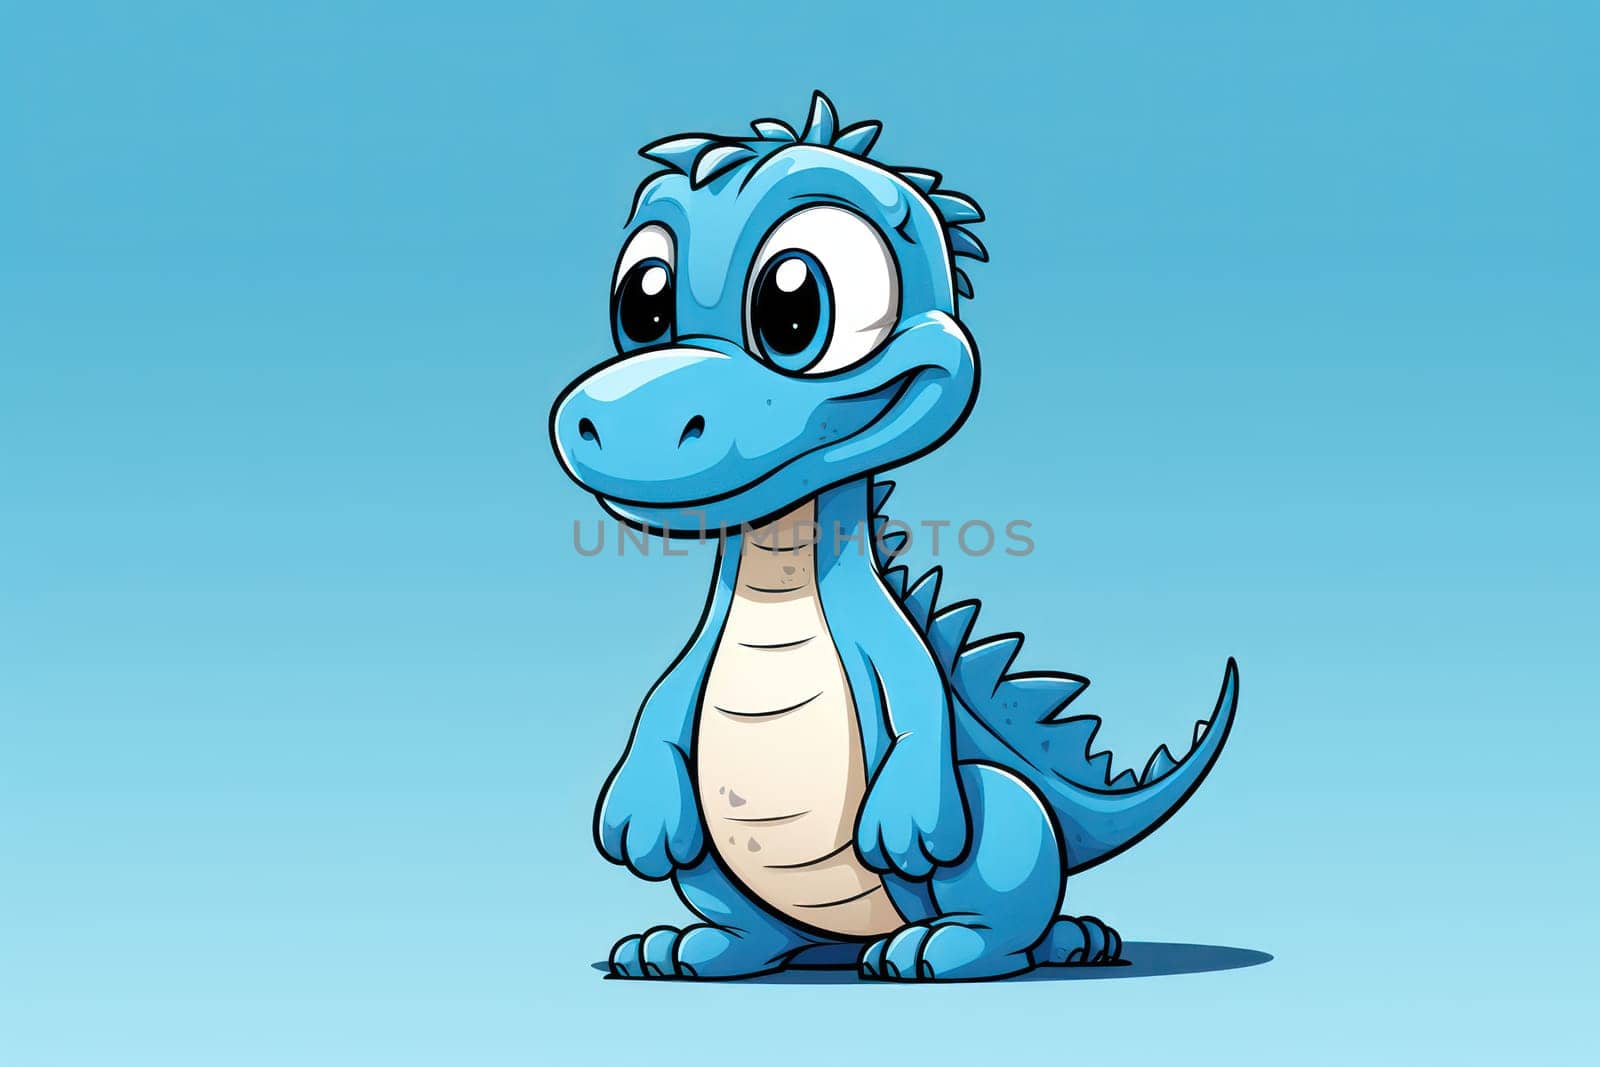 Cute Cartoon Dino: Fun and Friendly Jurassic Reptile Smiling in a Colorful African Landscape by Vichizh